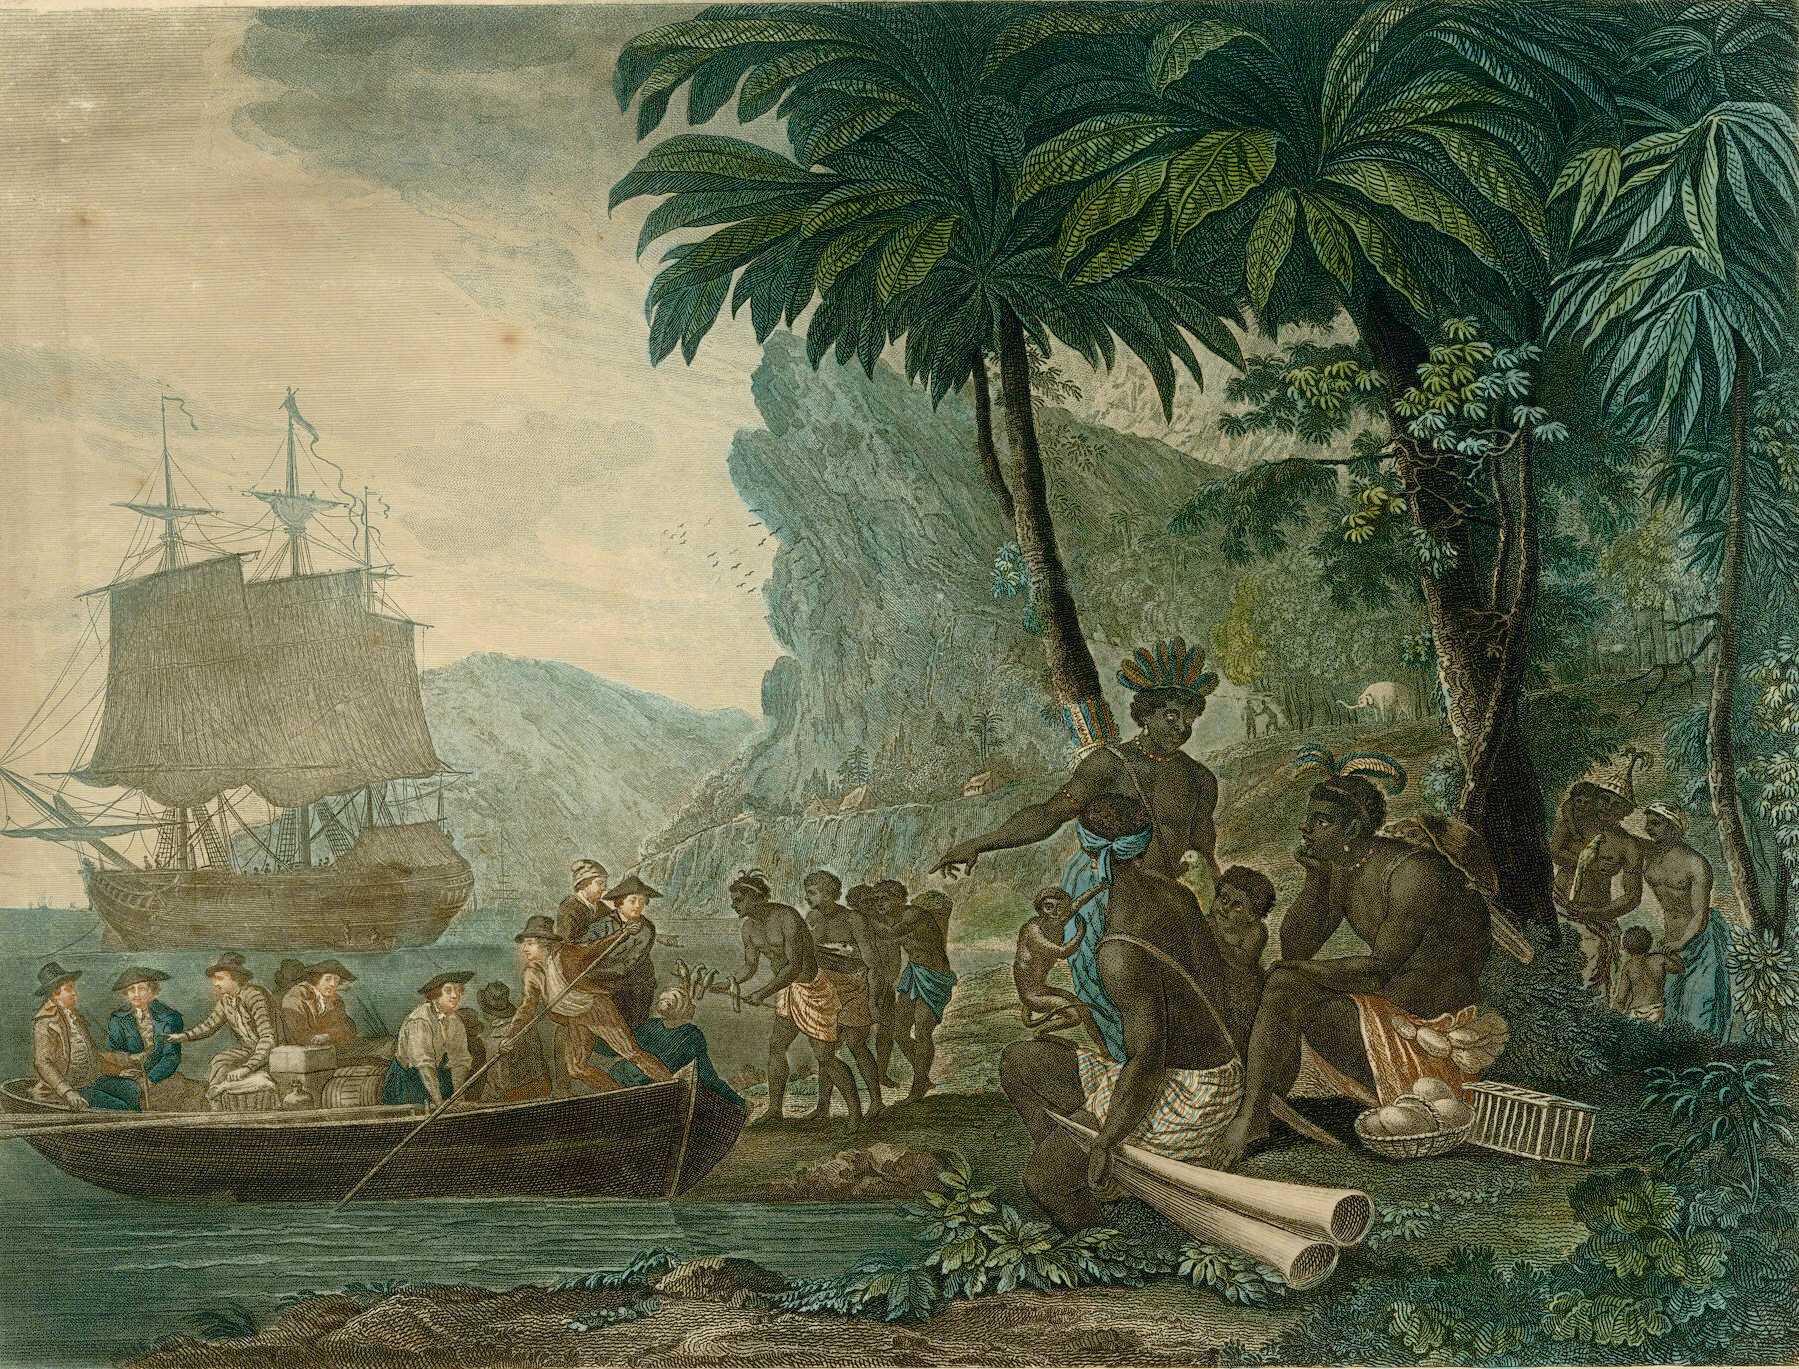 A painted illustration of European arriving in a small boat on the African coast with Africans talking with each other.